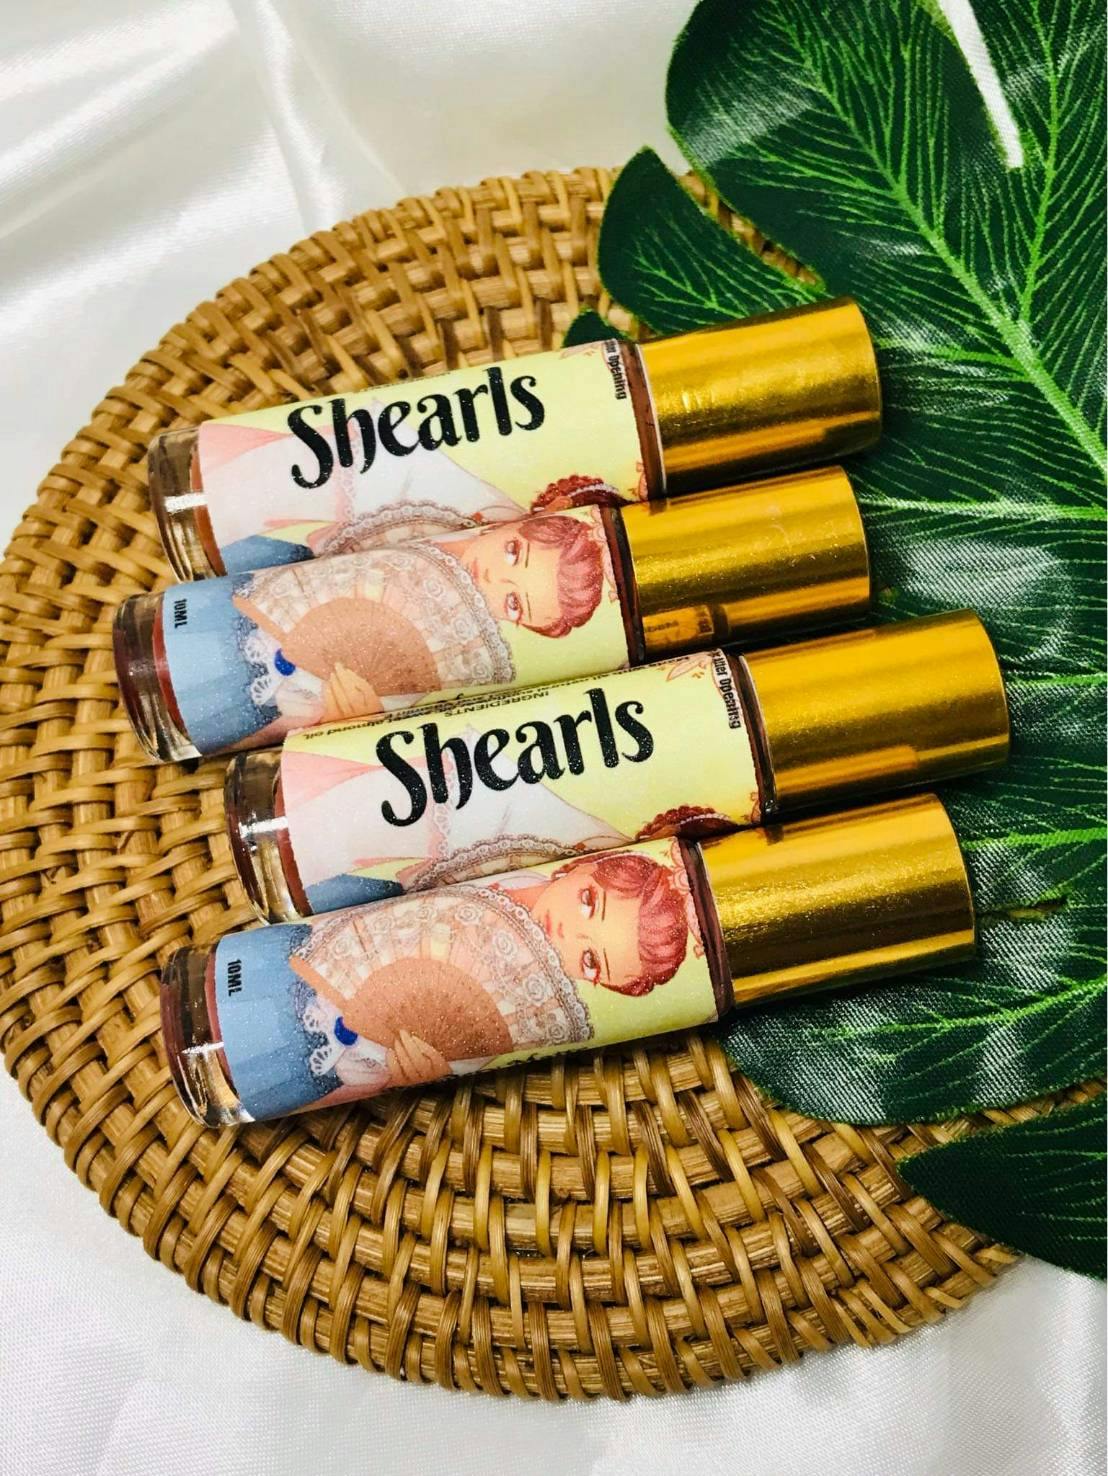 Shearls Lip tints and lip balms displayed in a basket